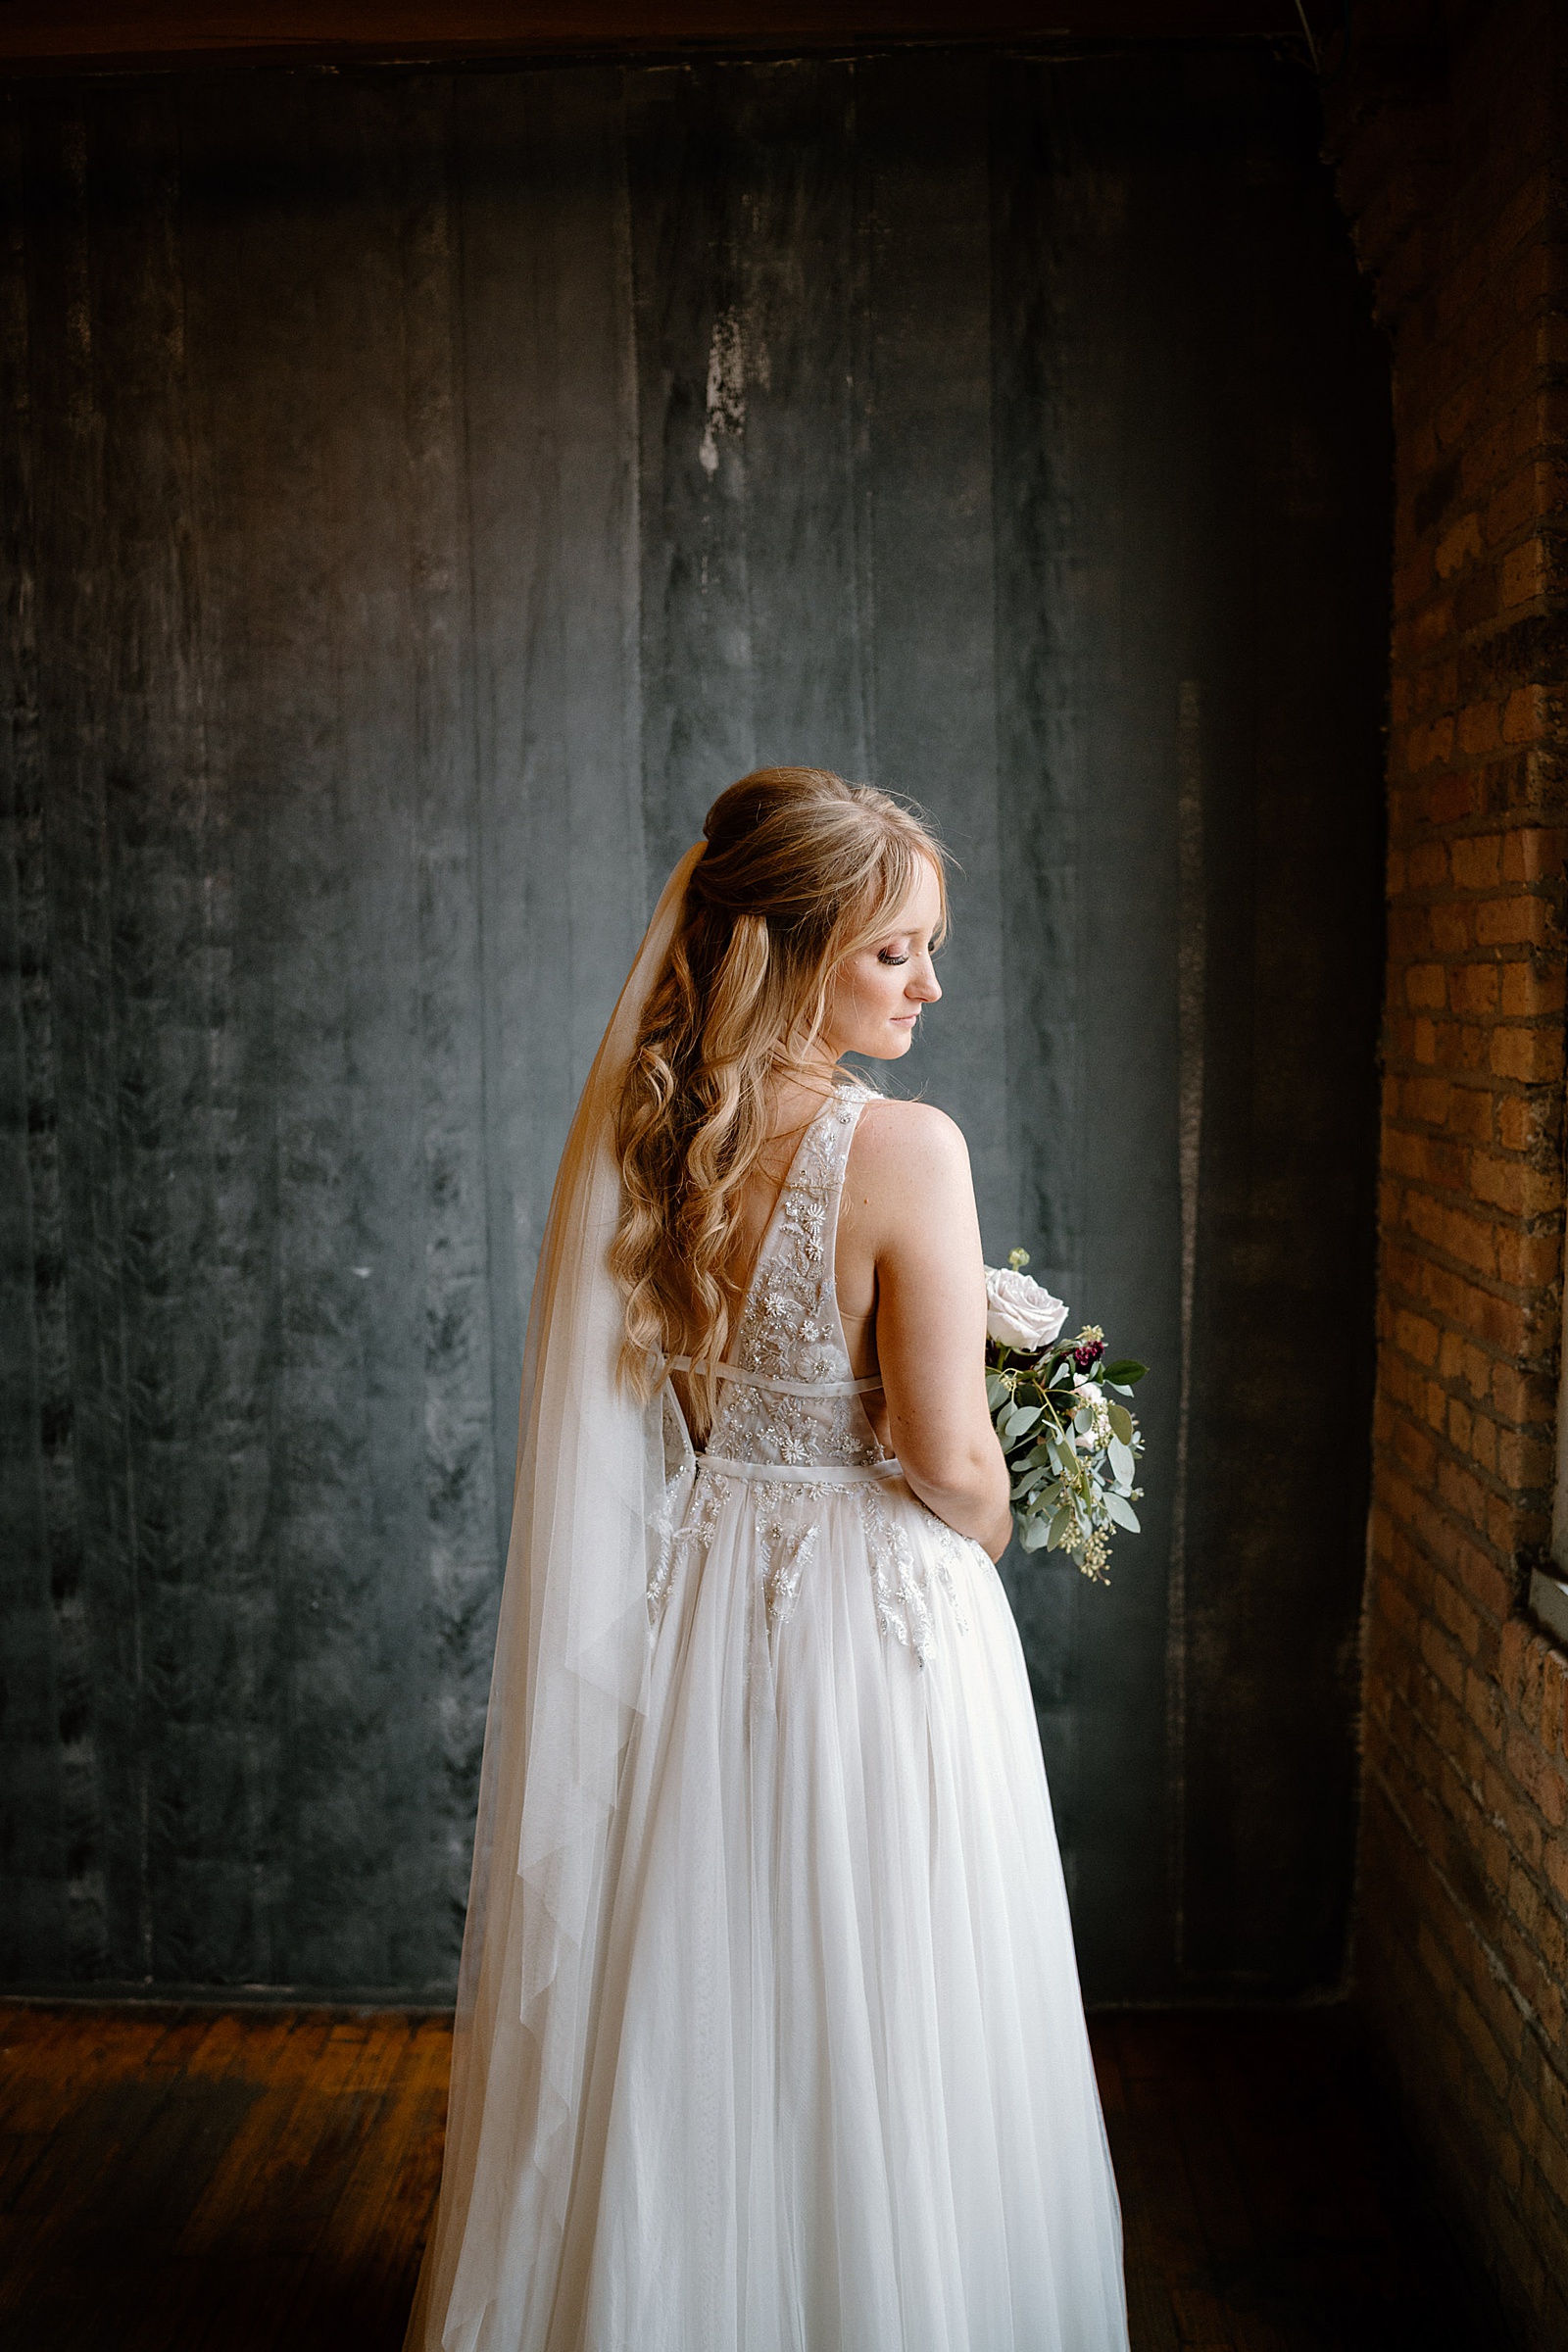 Bride in lace long gown in front of a window holding flowers